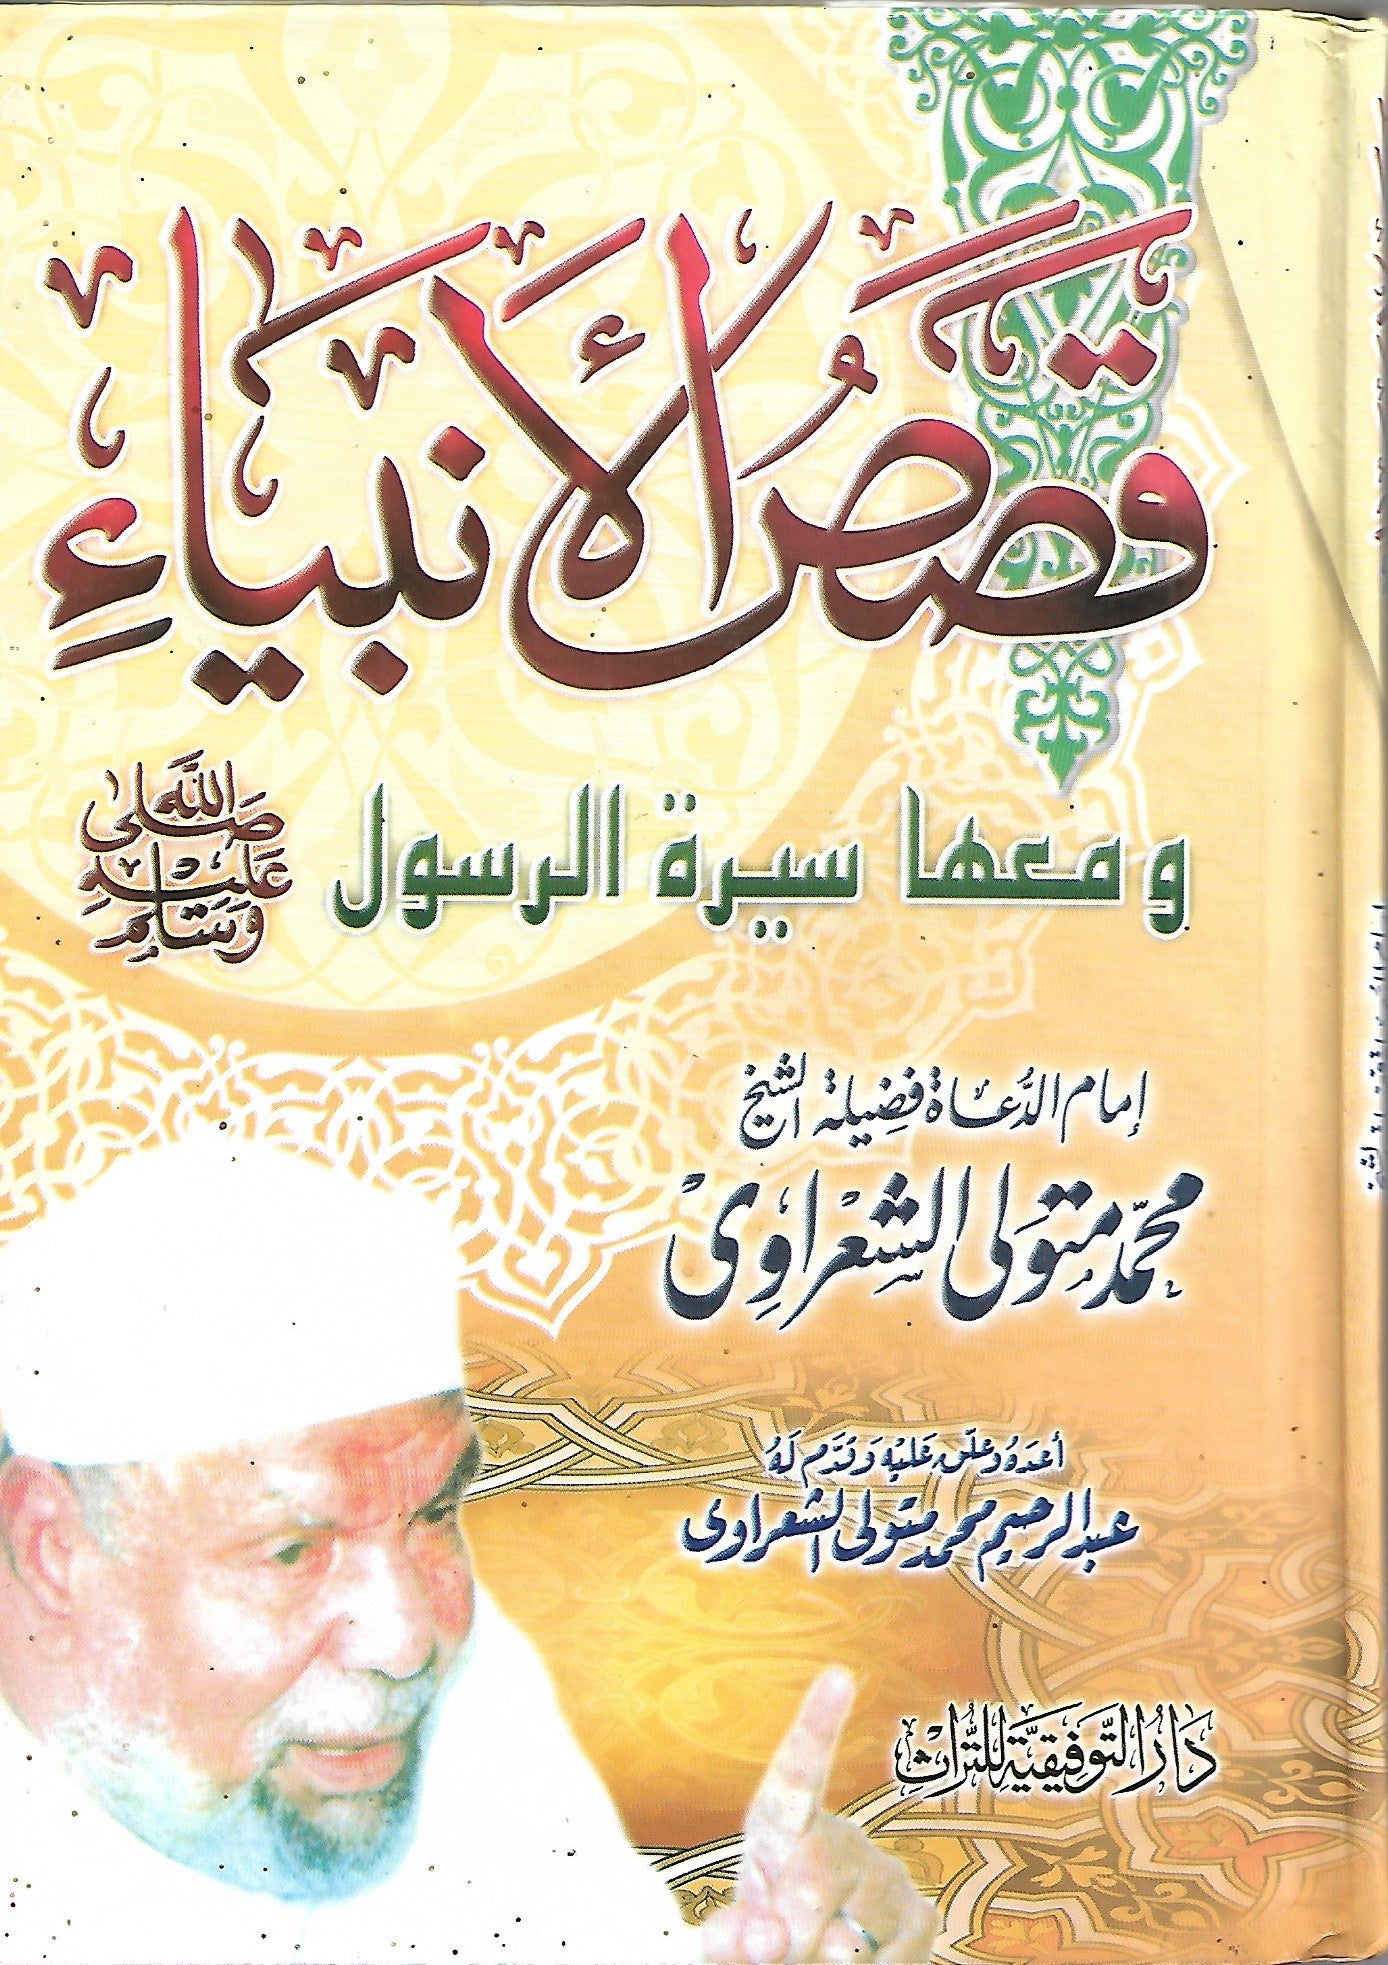 Stories of the Prophets and the biography of the Prophet and successors to the Messenger